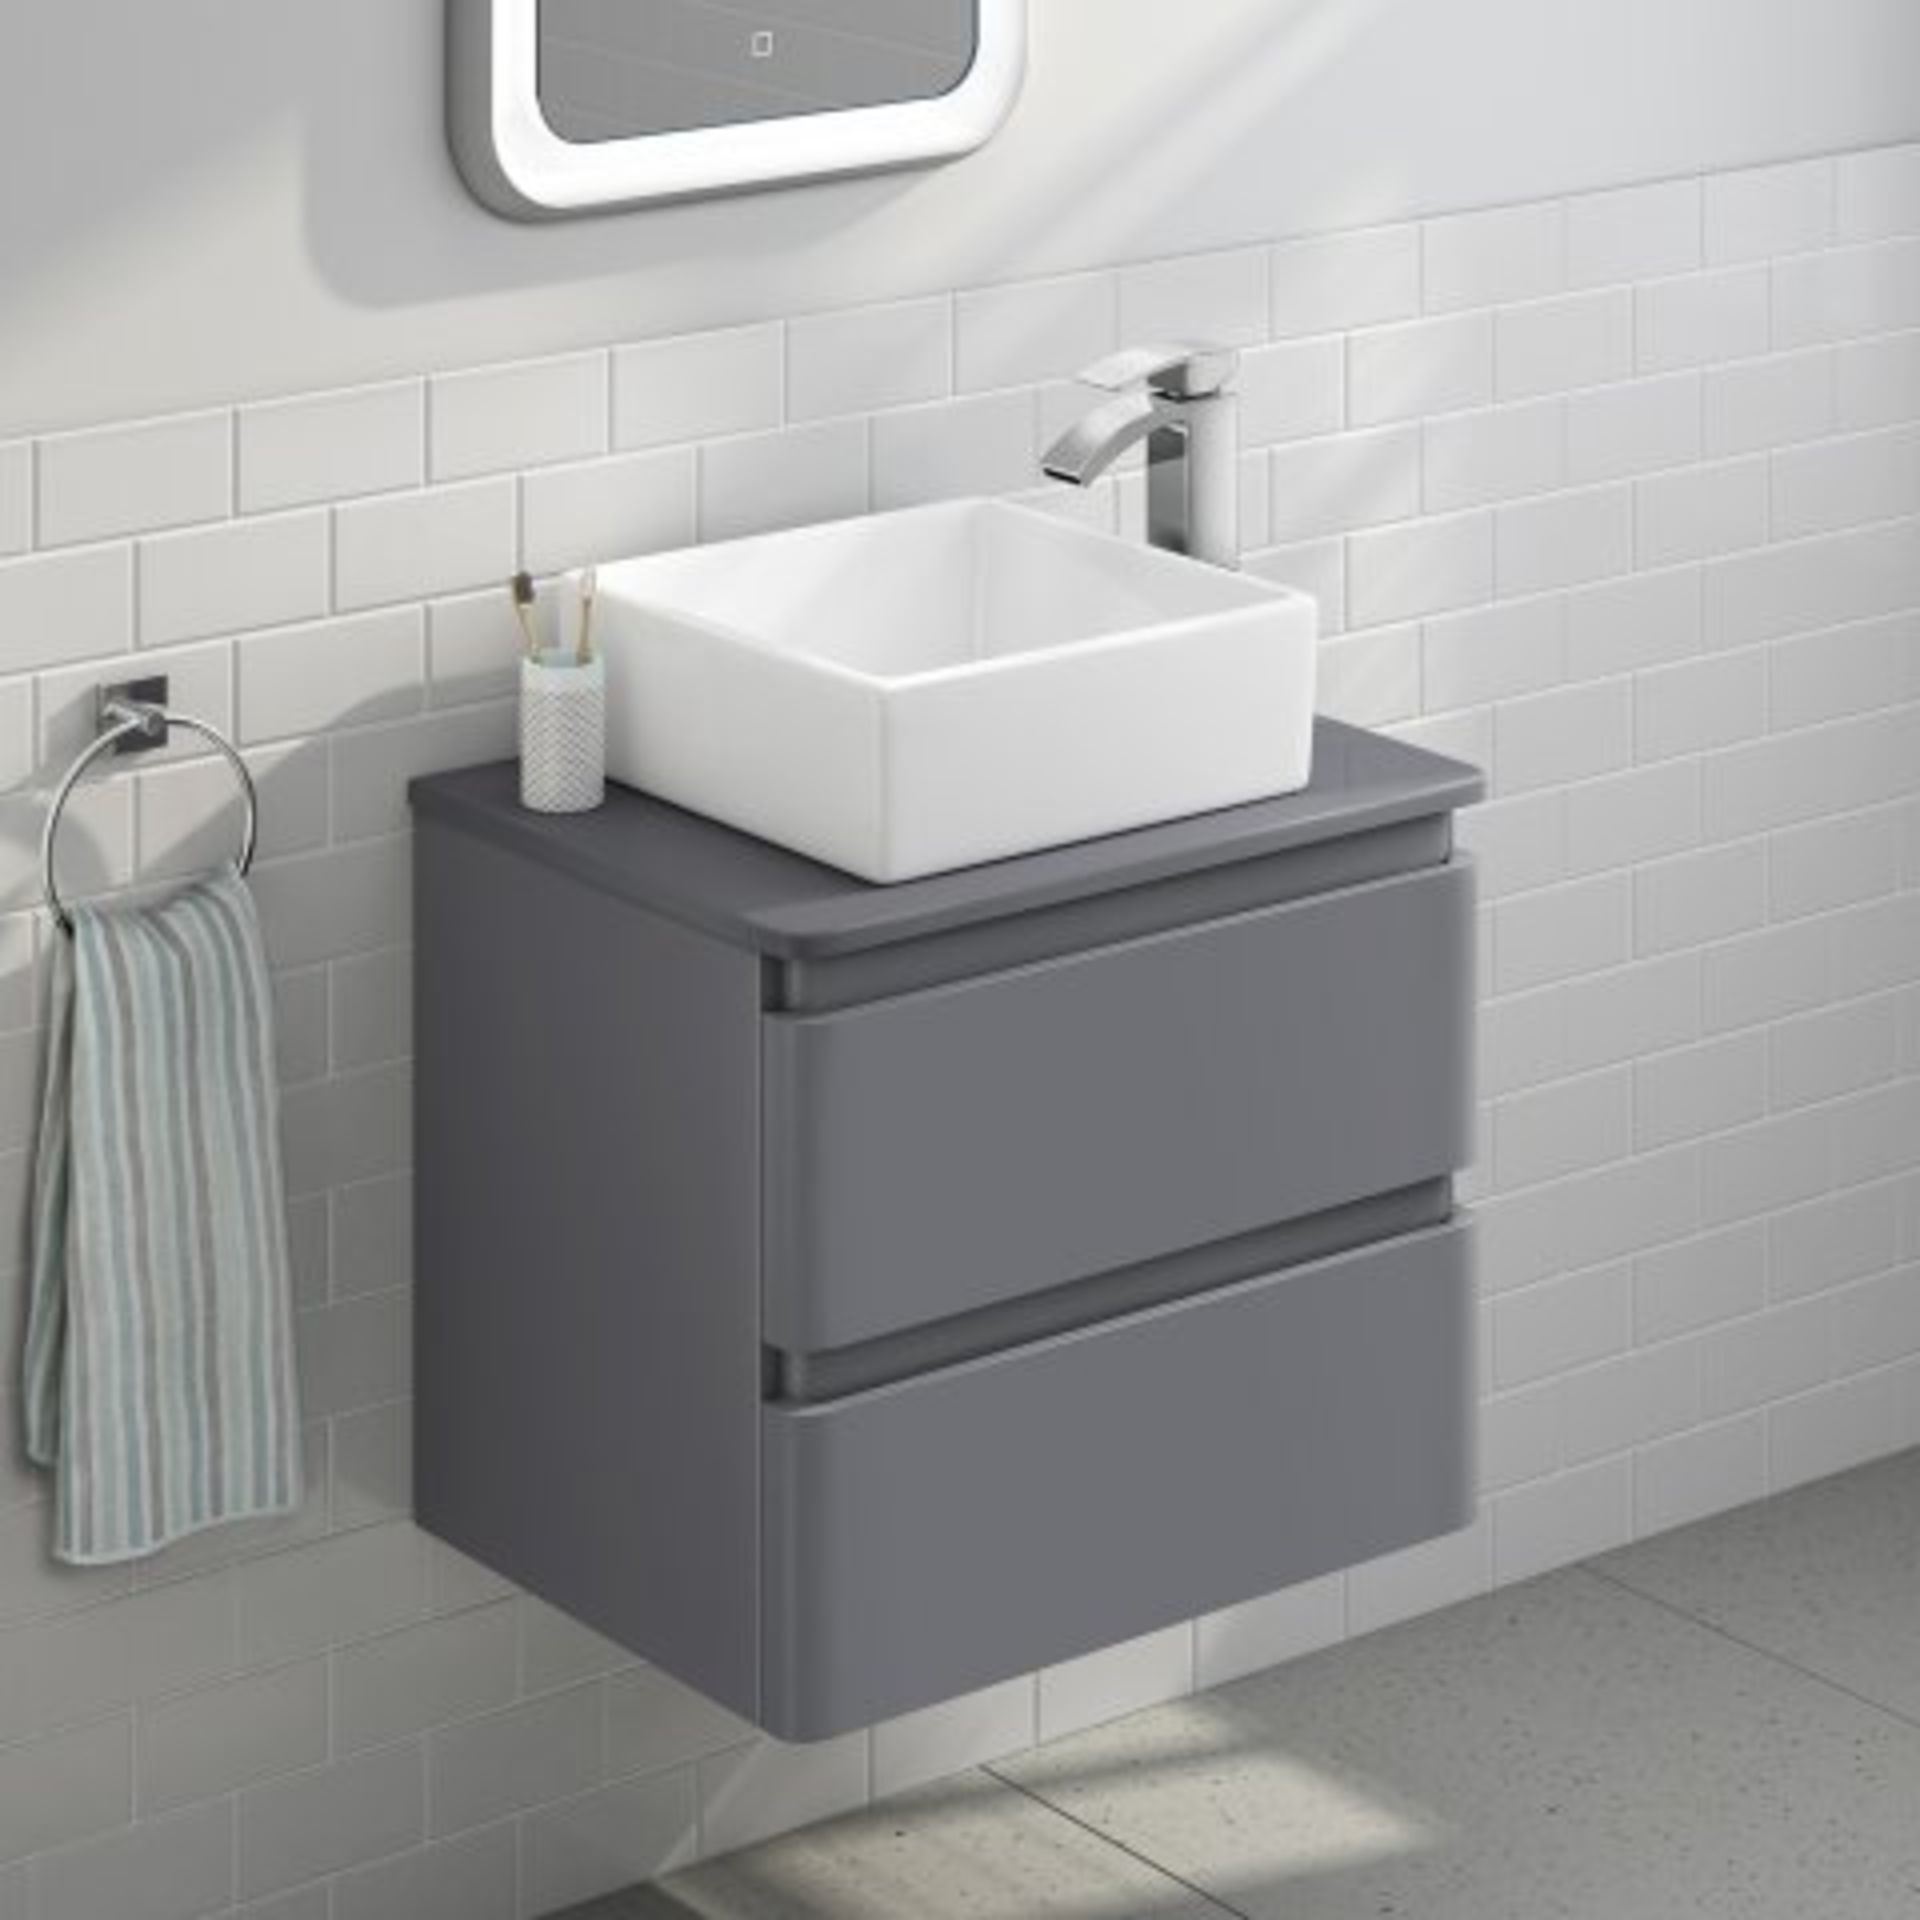 (O51) Rosa Counter Top Basin. RRP £94.99. This contemporary counter top basin offers great - Image 2 of 4